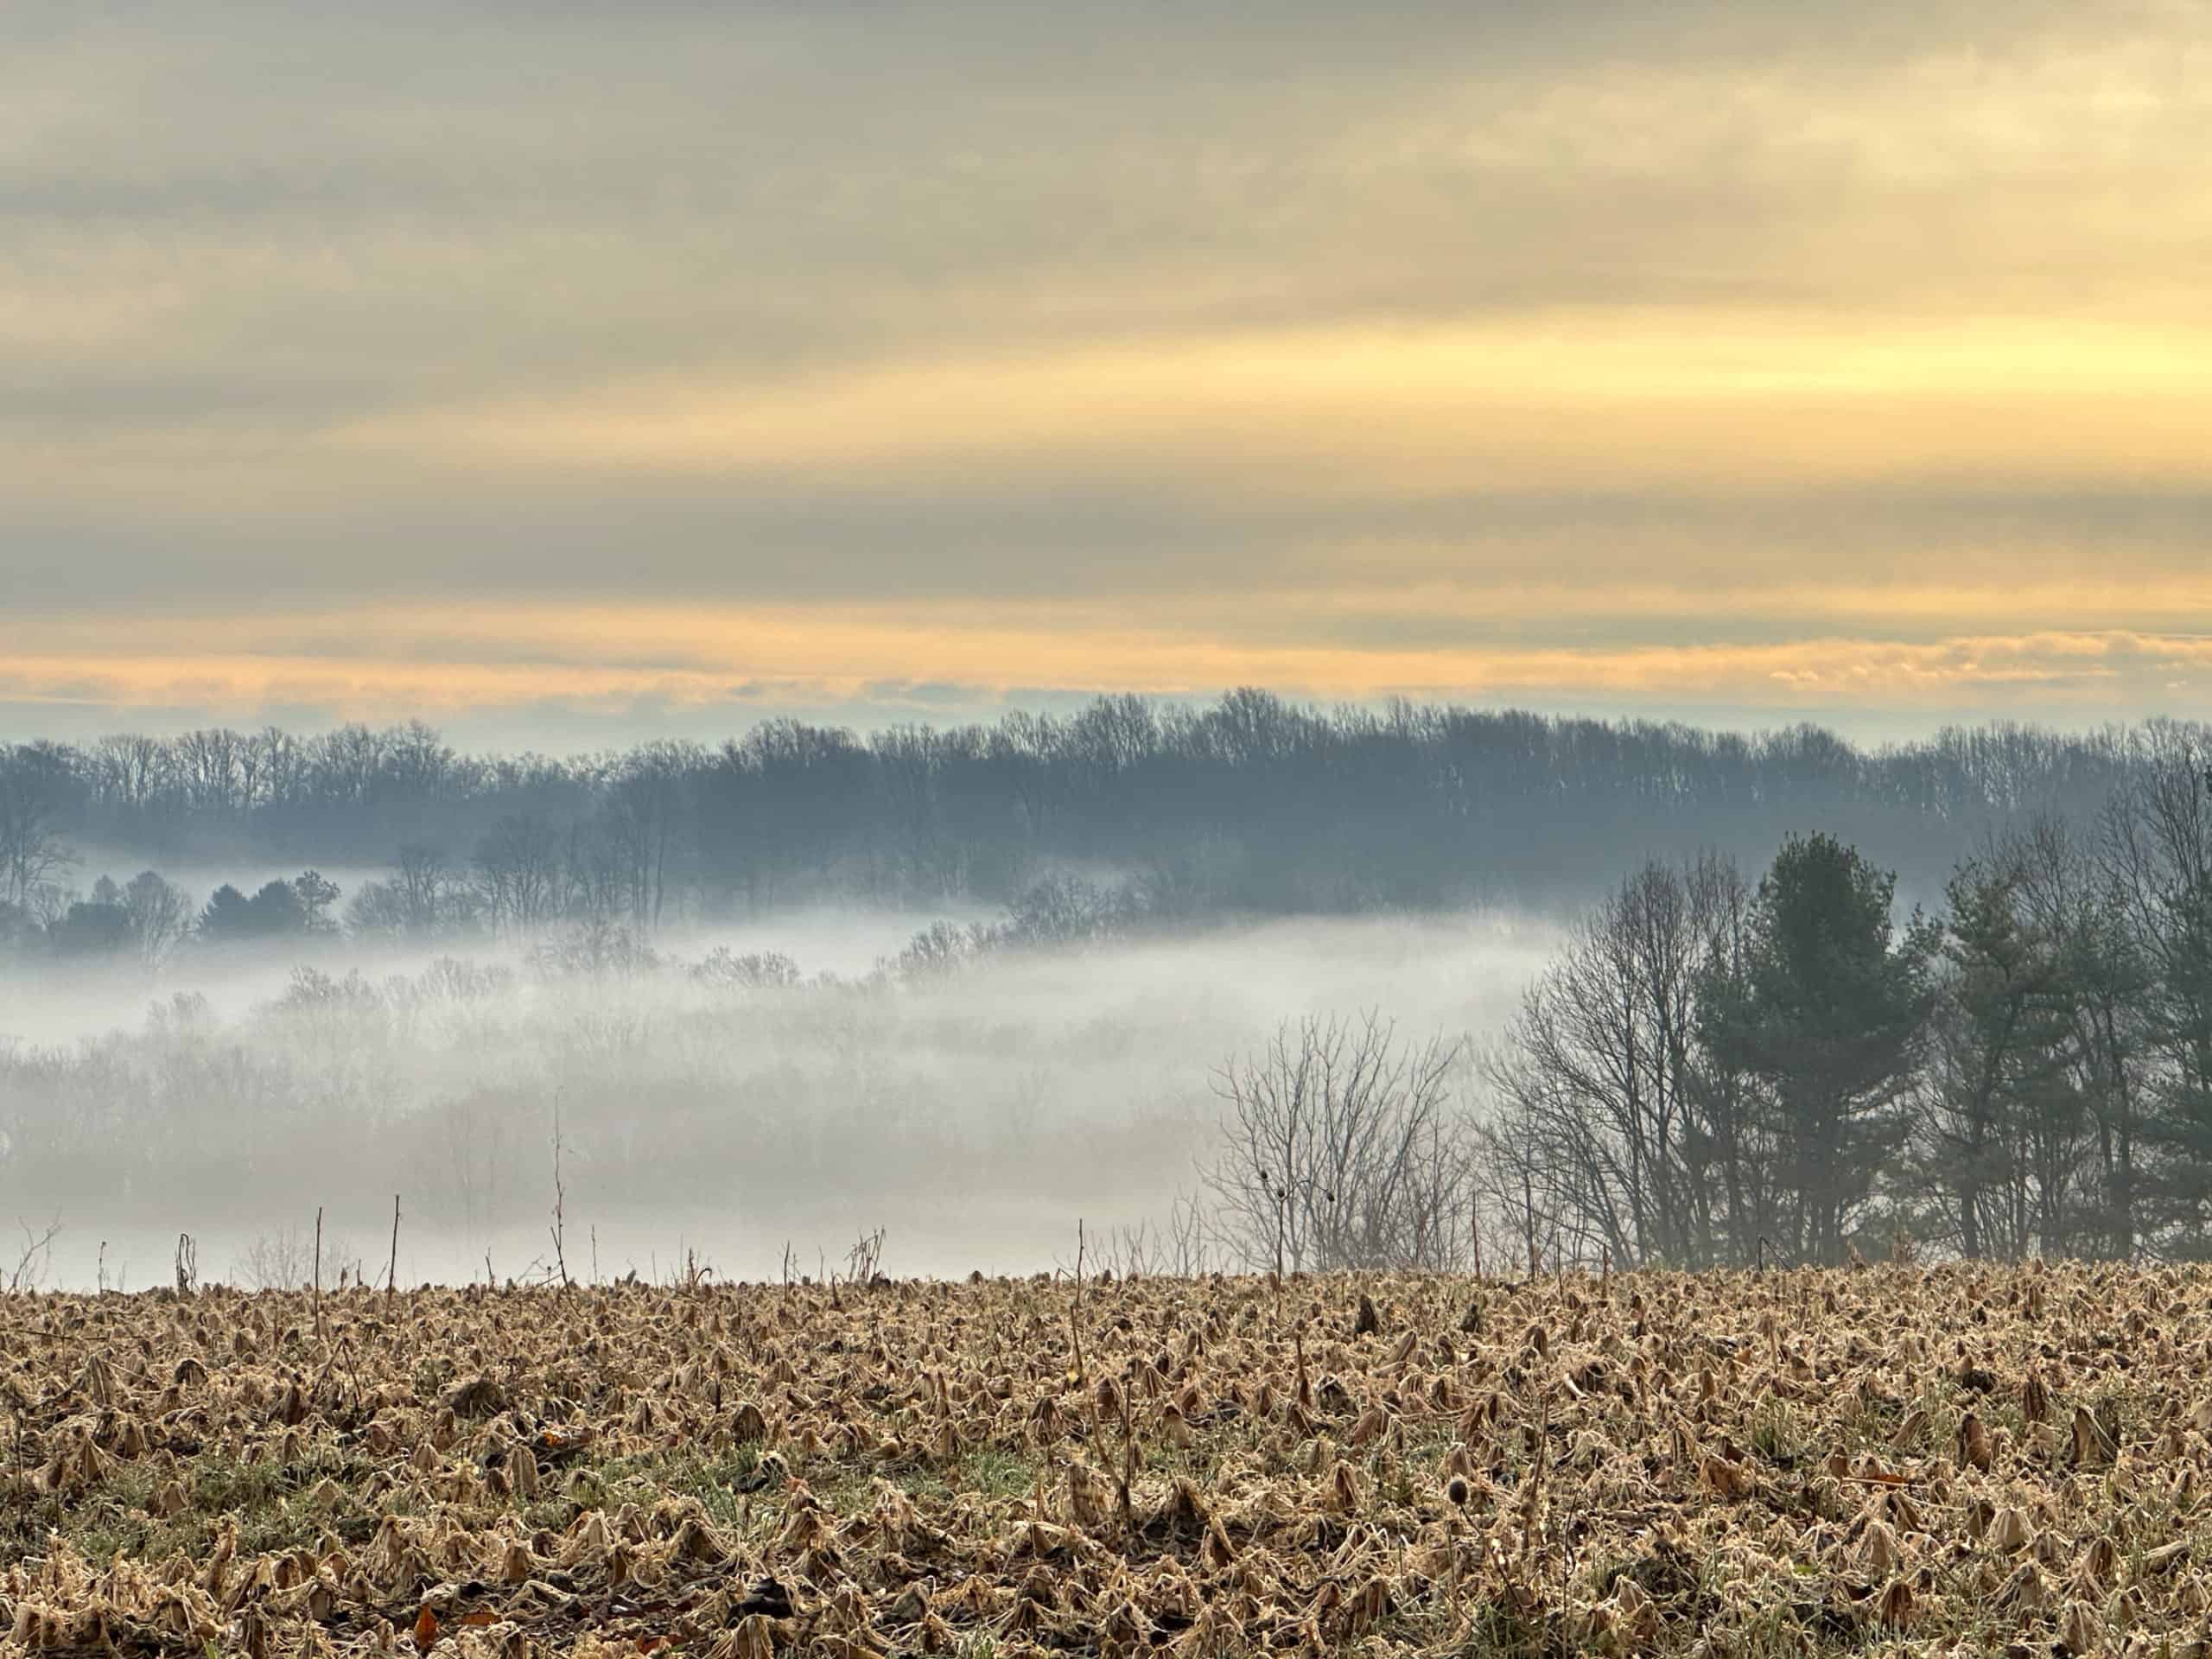 Hilltop view looking across farm field to forested valley shrouded in fog at Crow's Nest Preserve